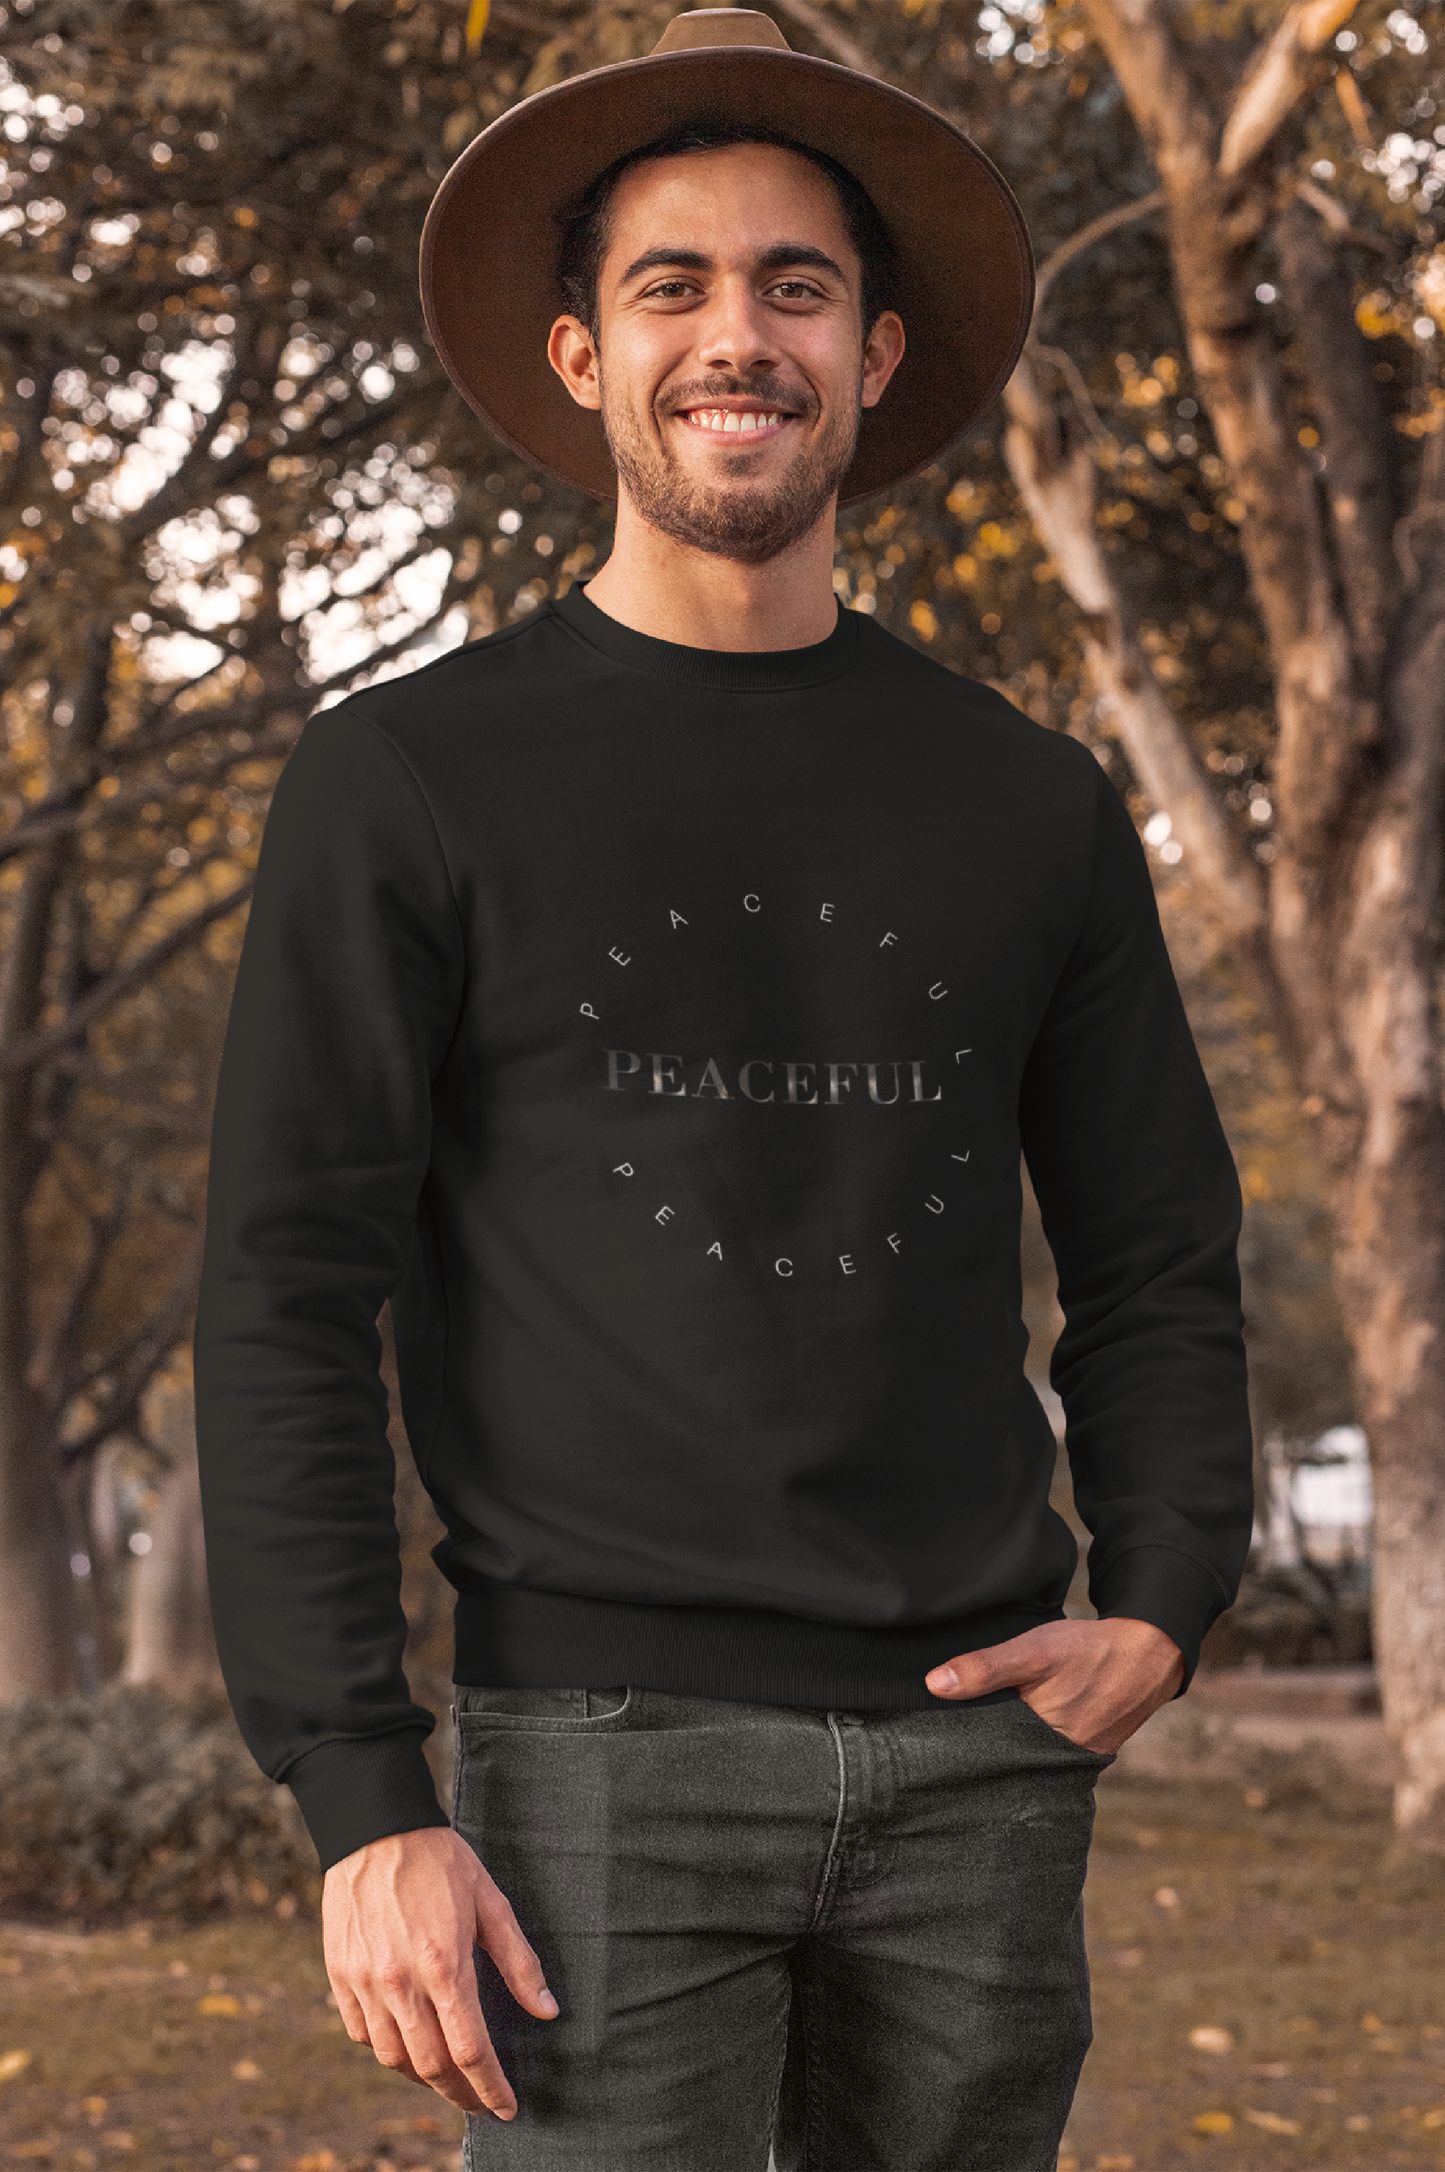 Peaceful Sweater, Inspirational Sweatshirt, Positive Quote Shirt For Women, Gift For Men Unisex Sweater